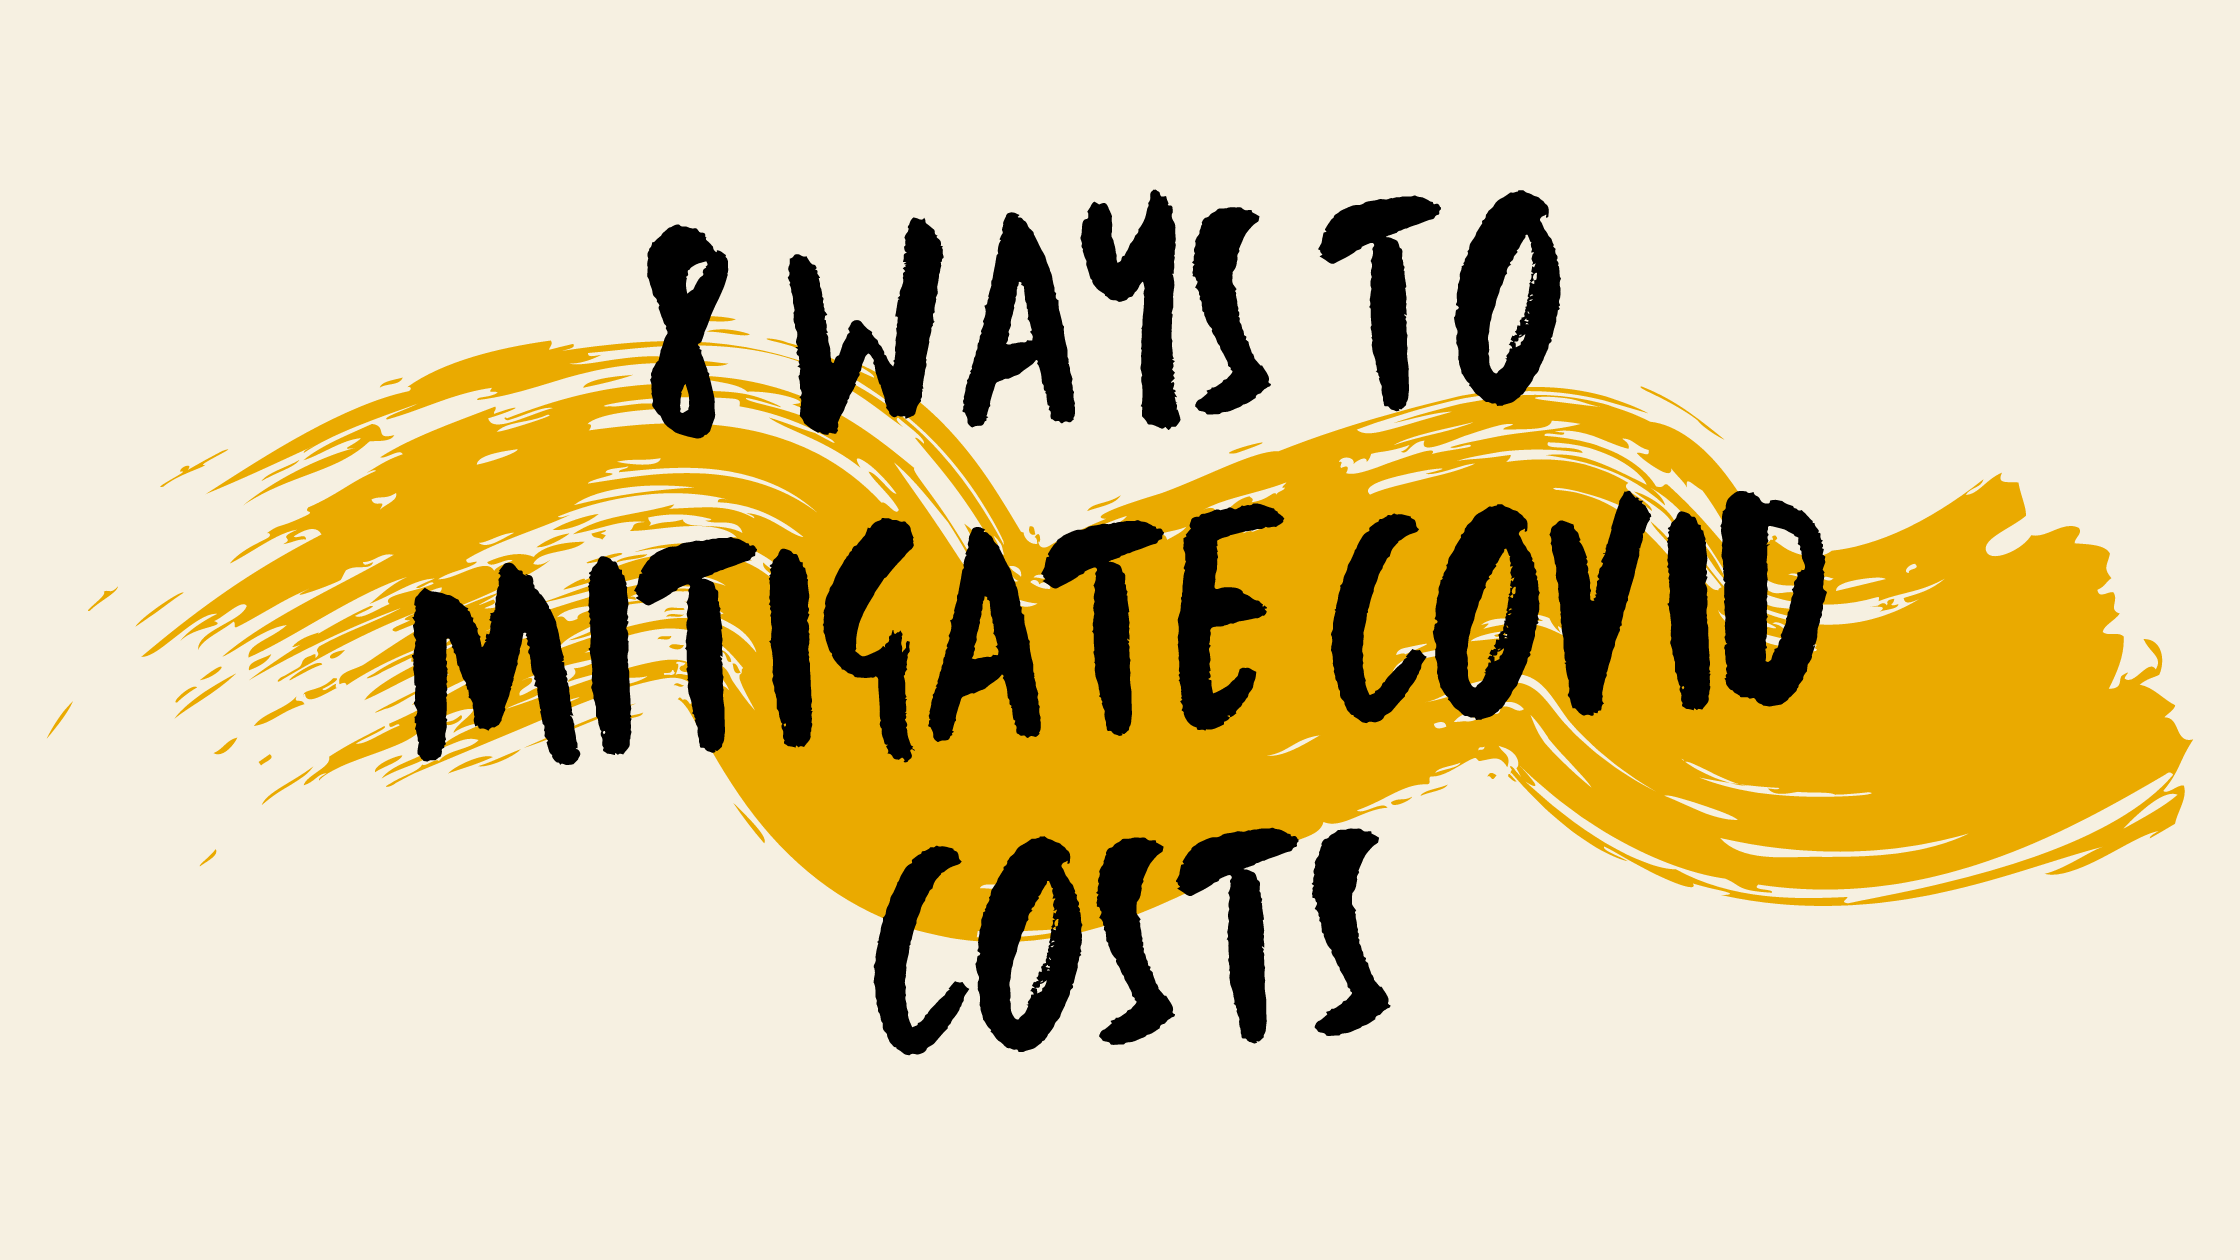 8 ways to mitigate covid costs email